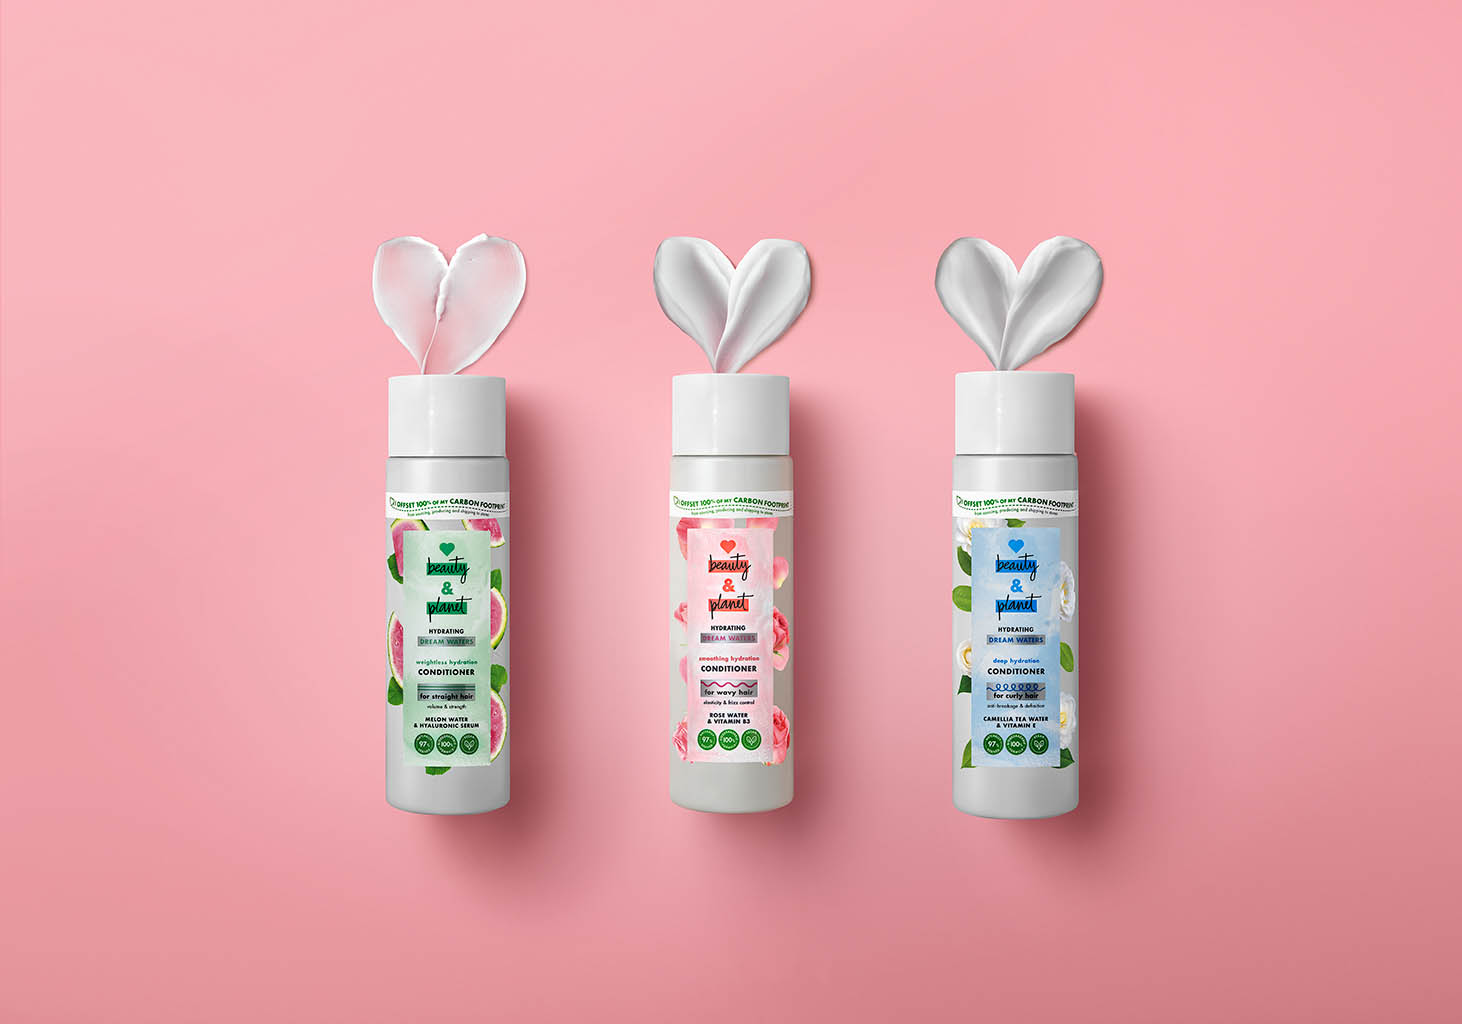 Packshot Factory - Coloured background - Love Beauty and Planet hair care